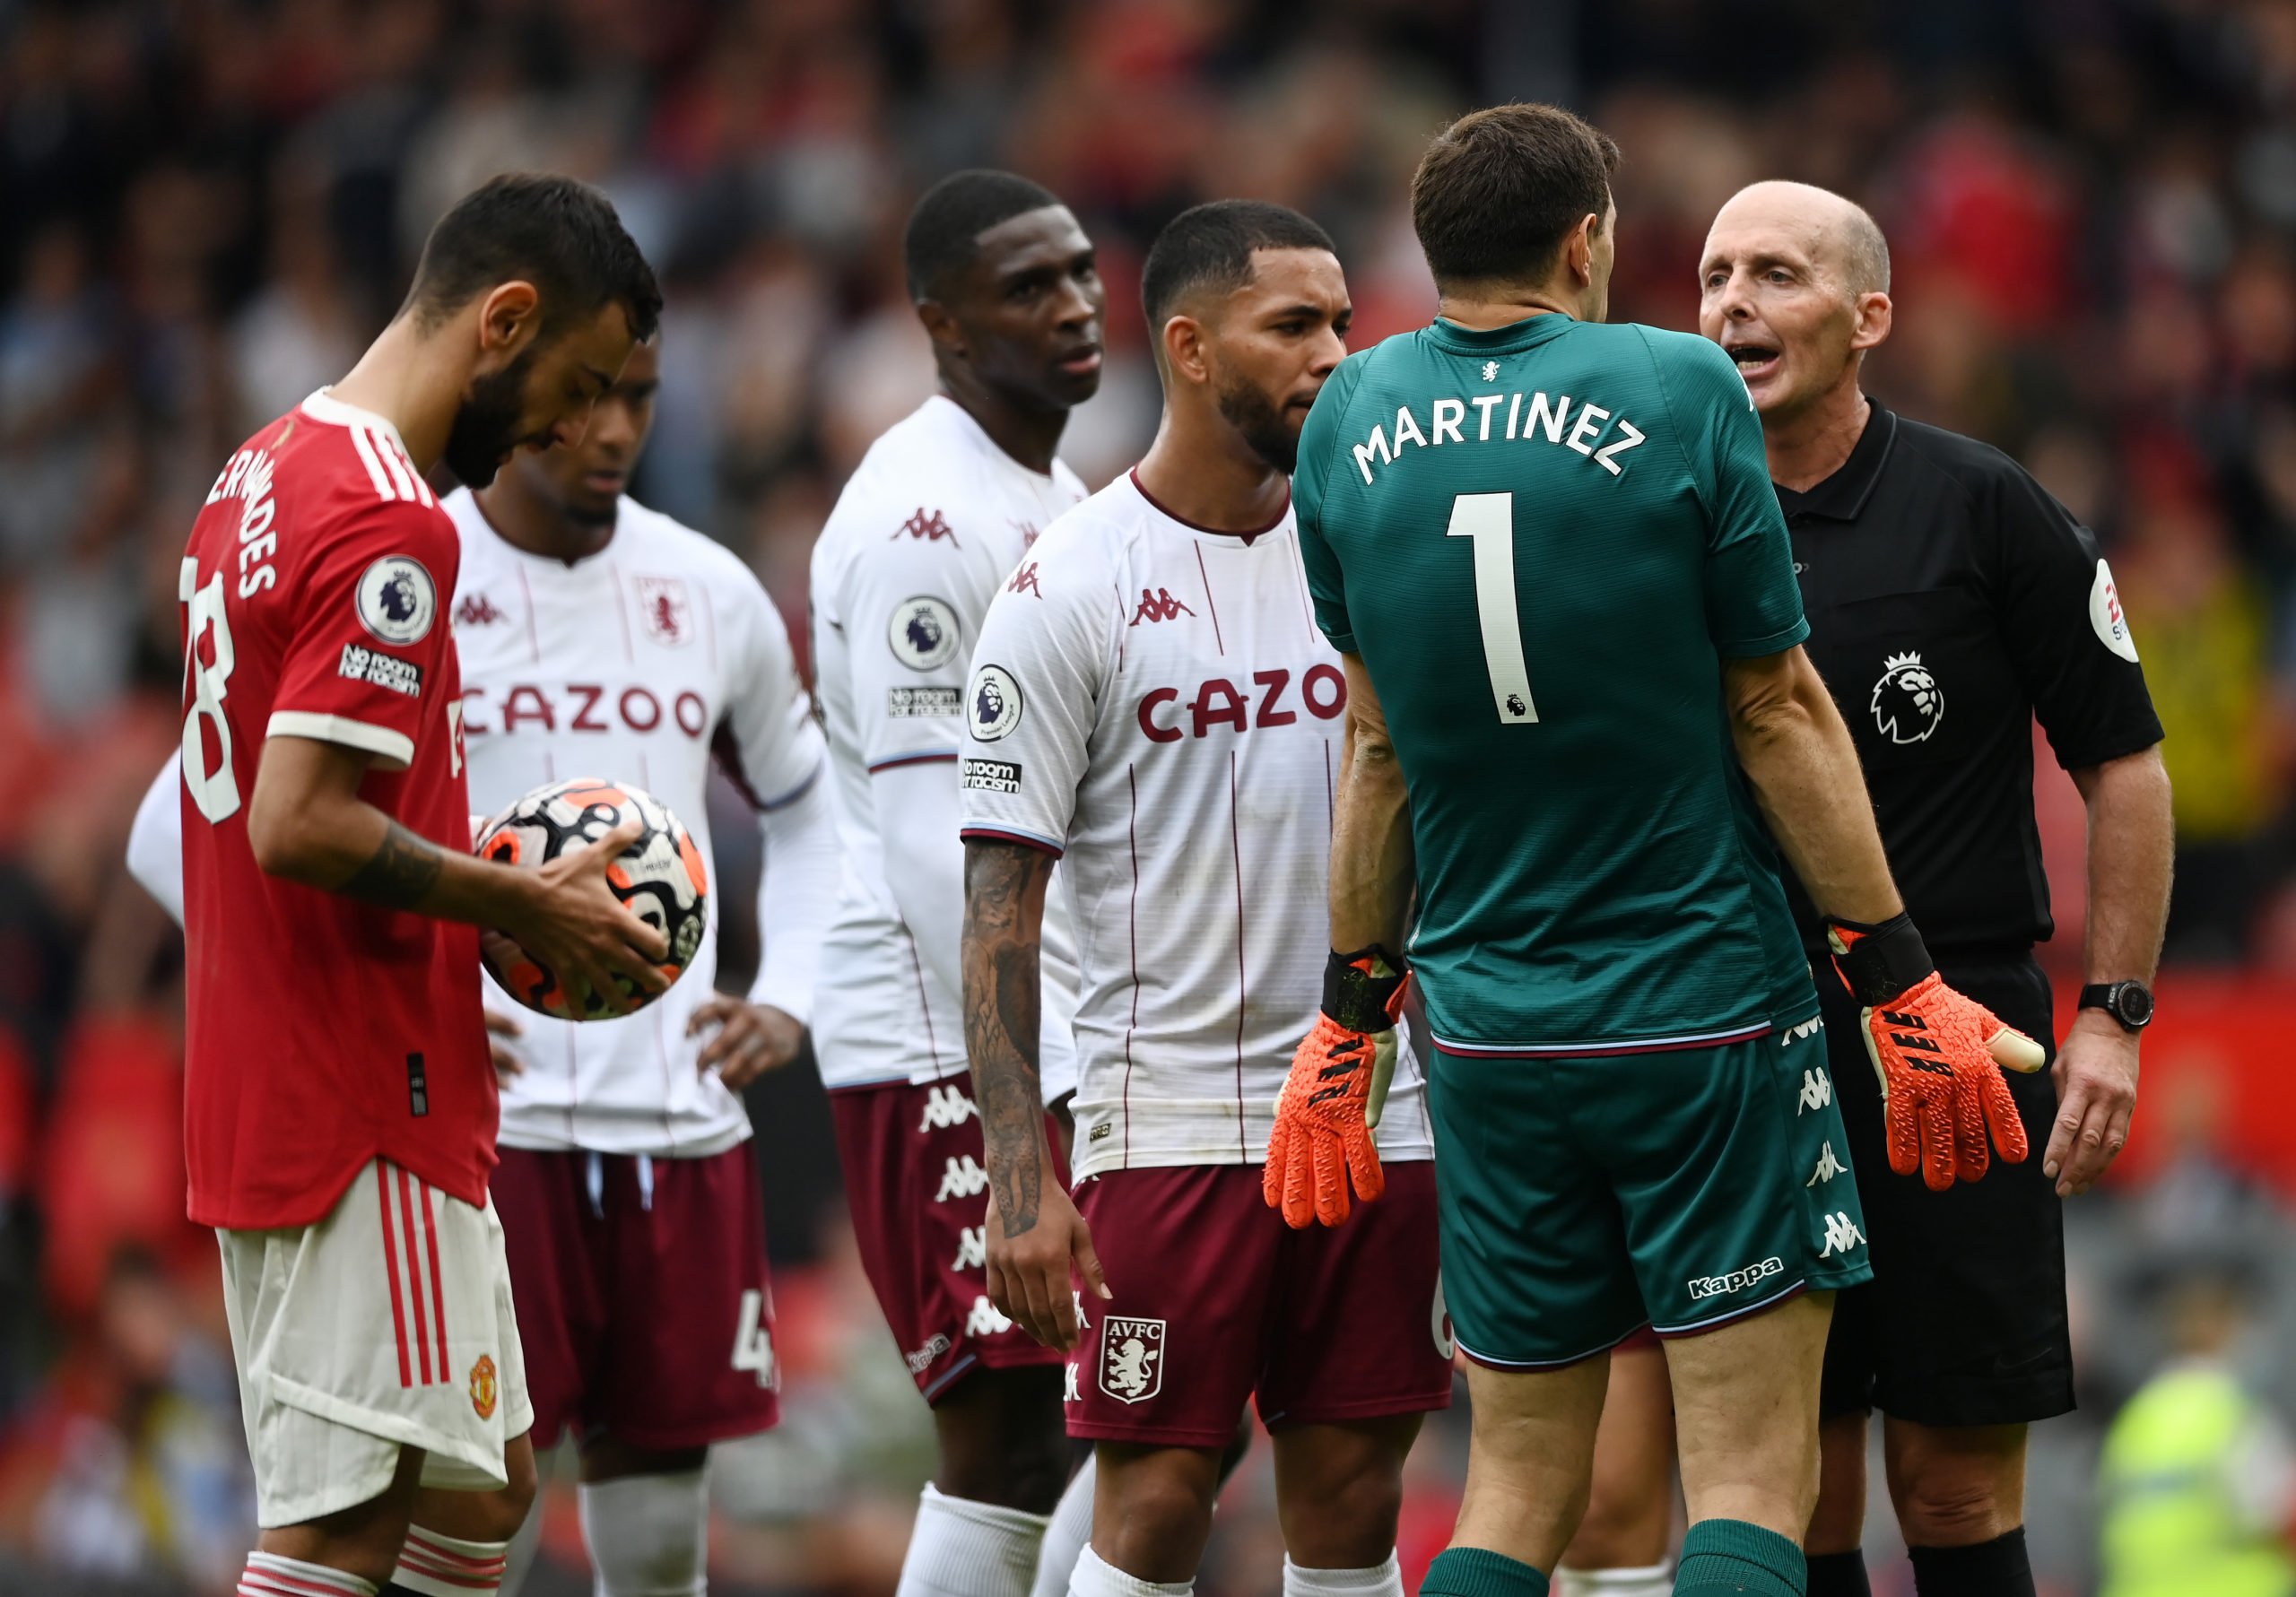 MANCHESTER, ENGLAND - SEPTEMBER 25: Referee Mike Dean speaks to Emiliano Martinez of Aston Villa  during the Premier League match between Manchester United and Aston Villa at Old Trafford on September 25, 2021 in Manchester, England. (Photo by Gareth Copley/Getty Images)
The 4th Official uses images provided by the following image agency: Getty Images (https://www.gettyimages.de/) and Imago Images (https://www.imago-images.de/)